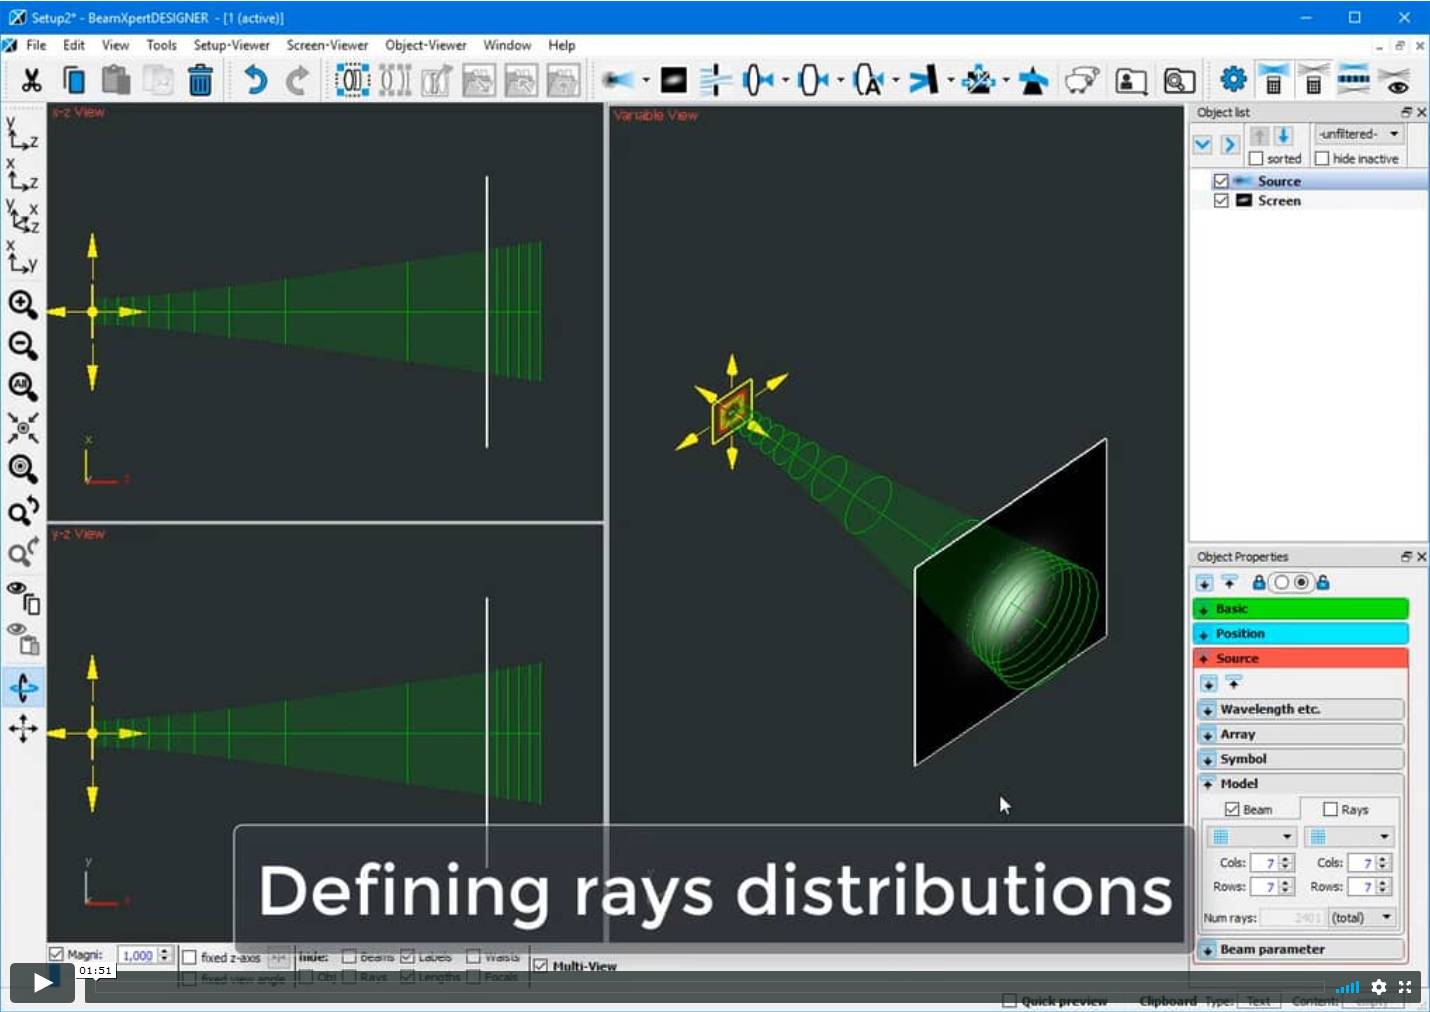 BeamXpertDESIGNER - Defining optical distributions in the ray model for aberration analysis